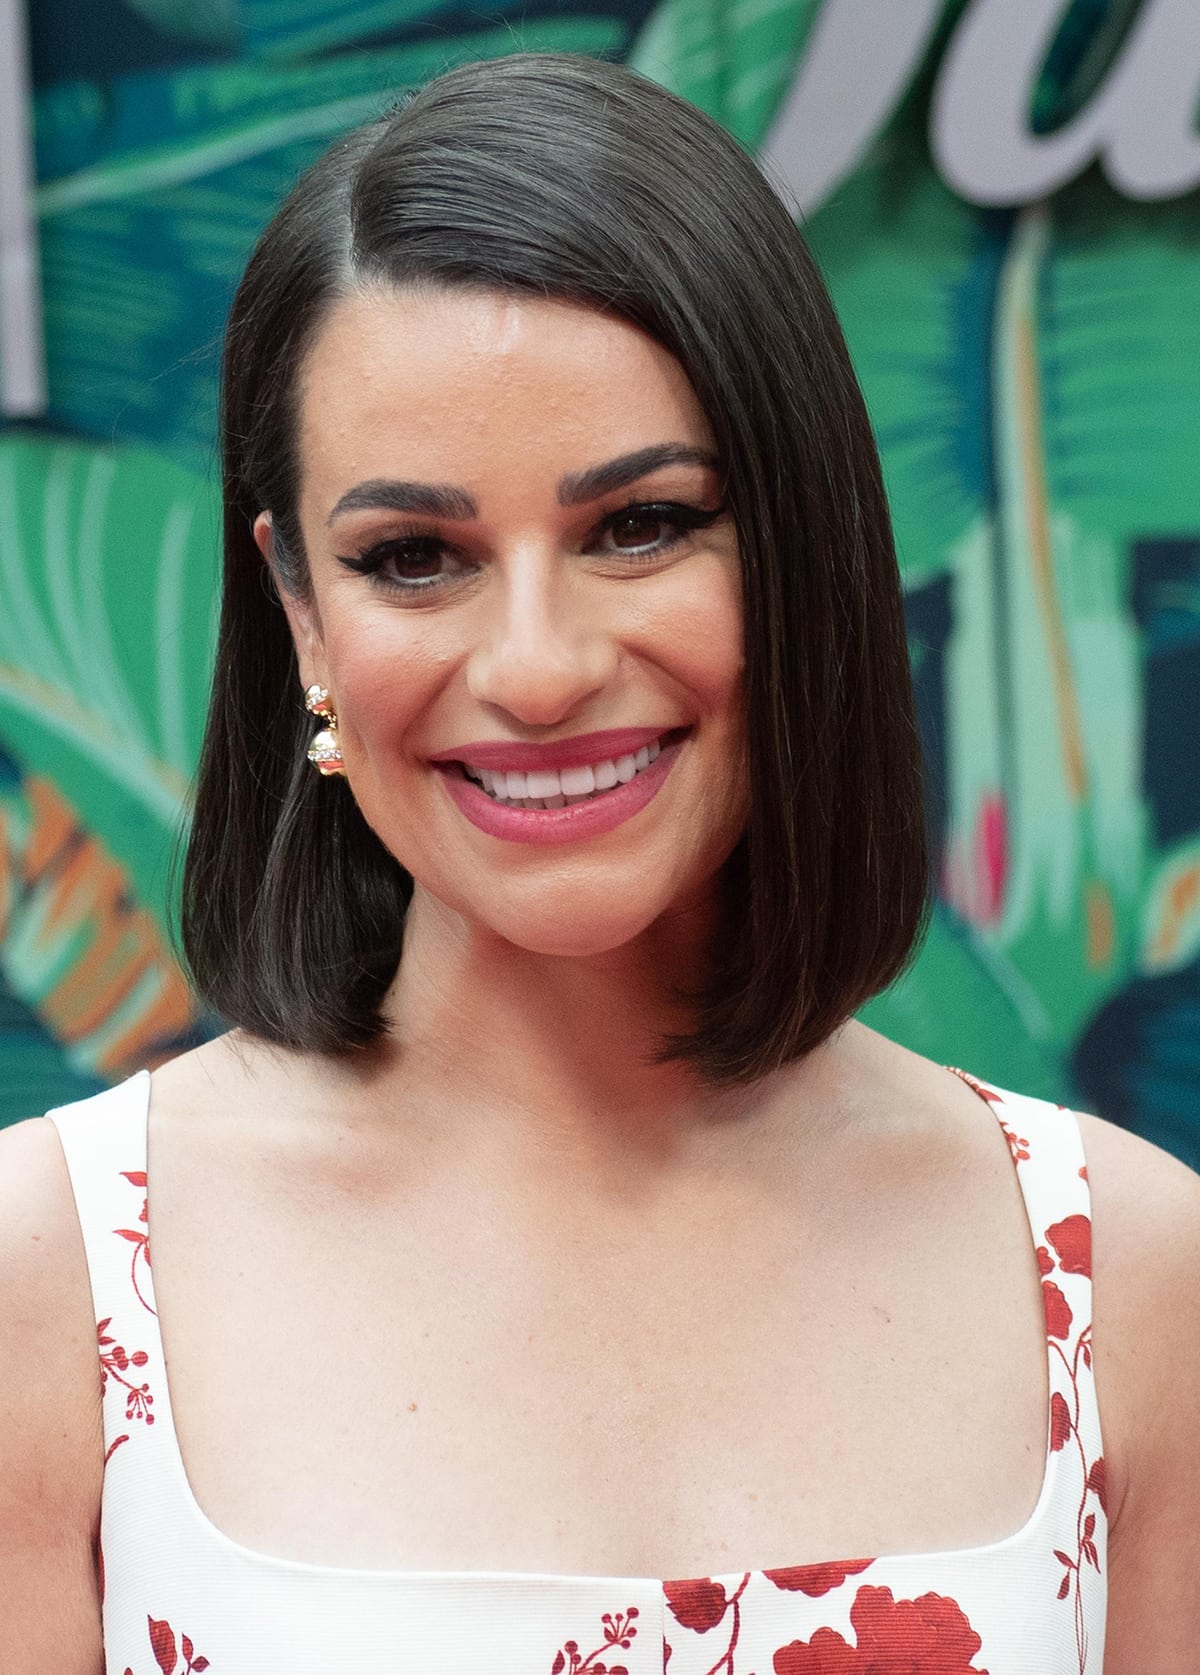 Lea Michele parts her tresses to one side and wears dramatic eyeshadow and fluttery eyelashes to highlight her brown eyes